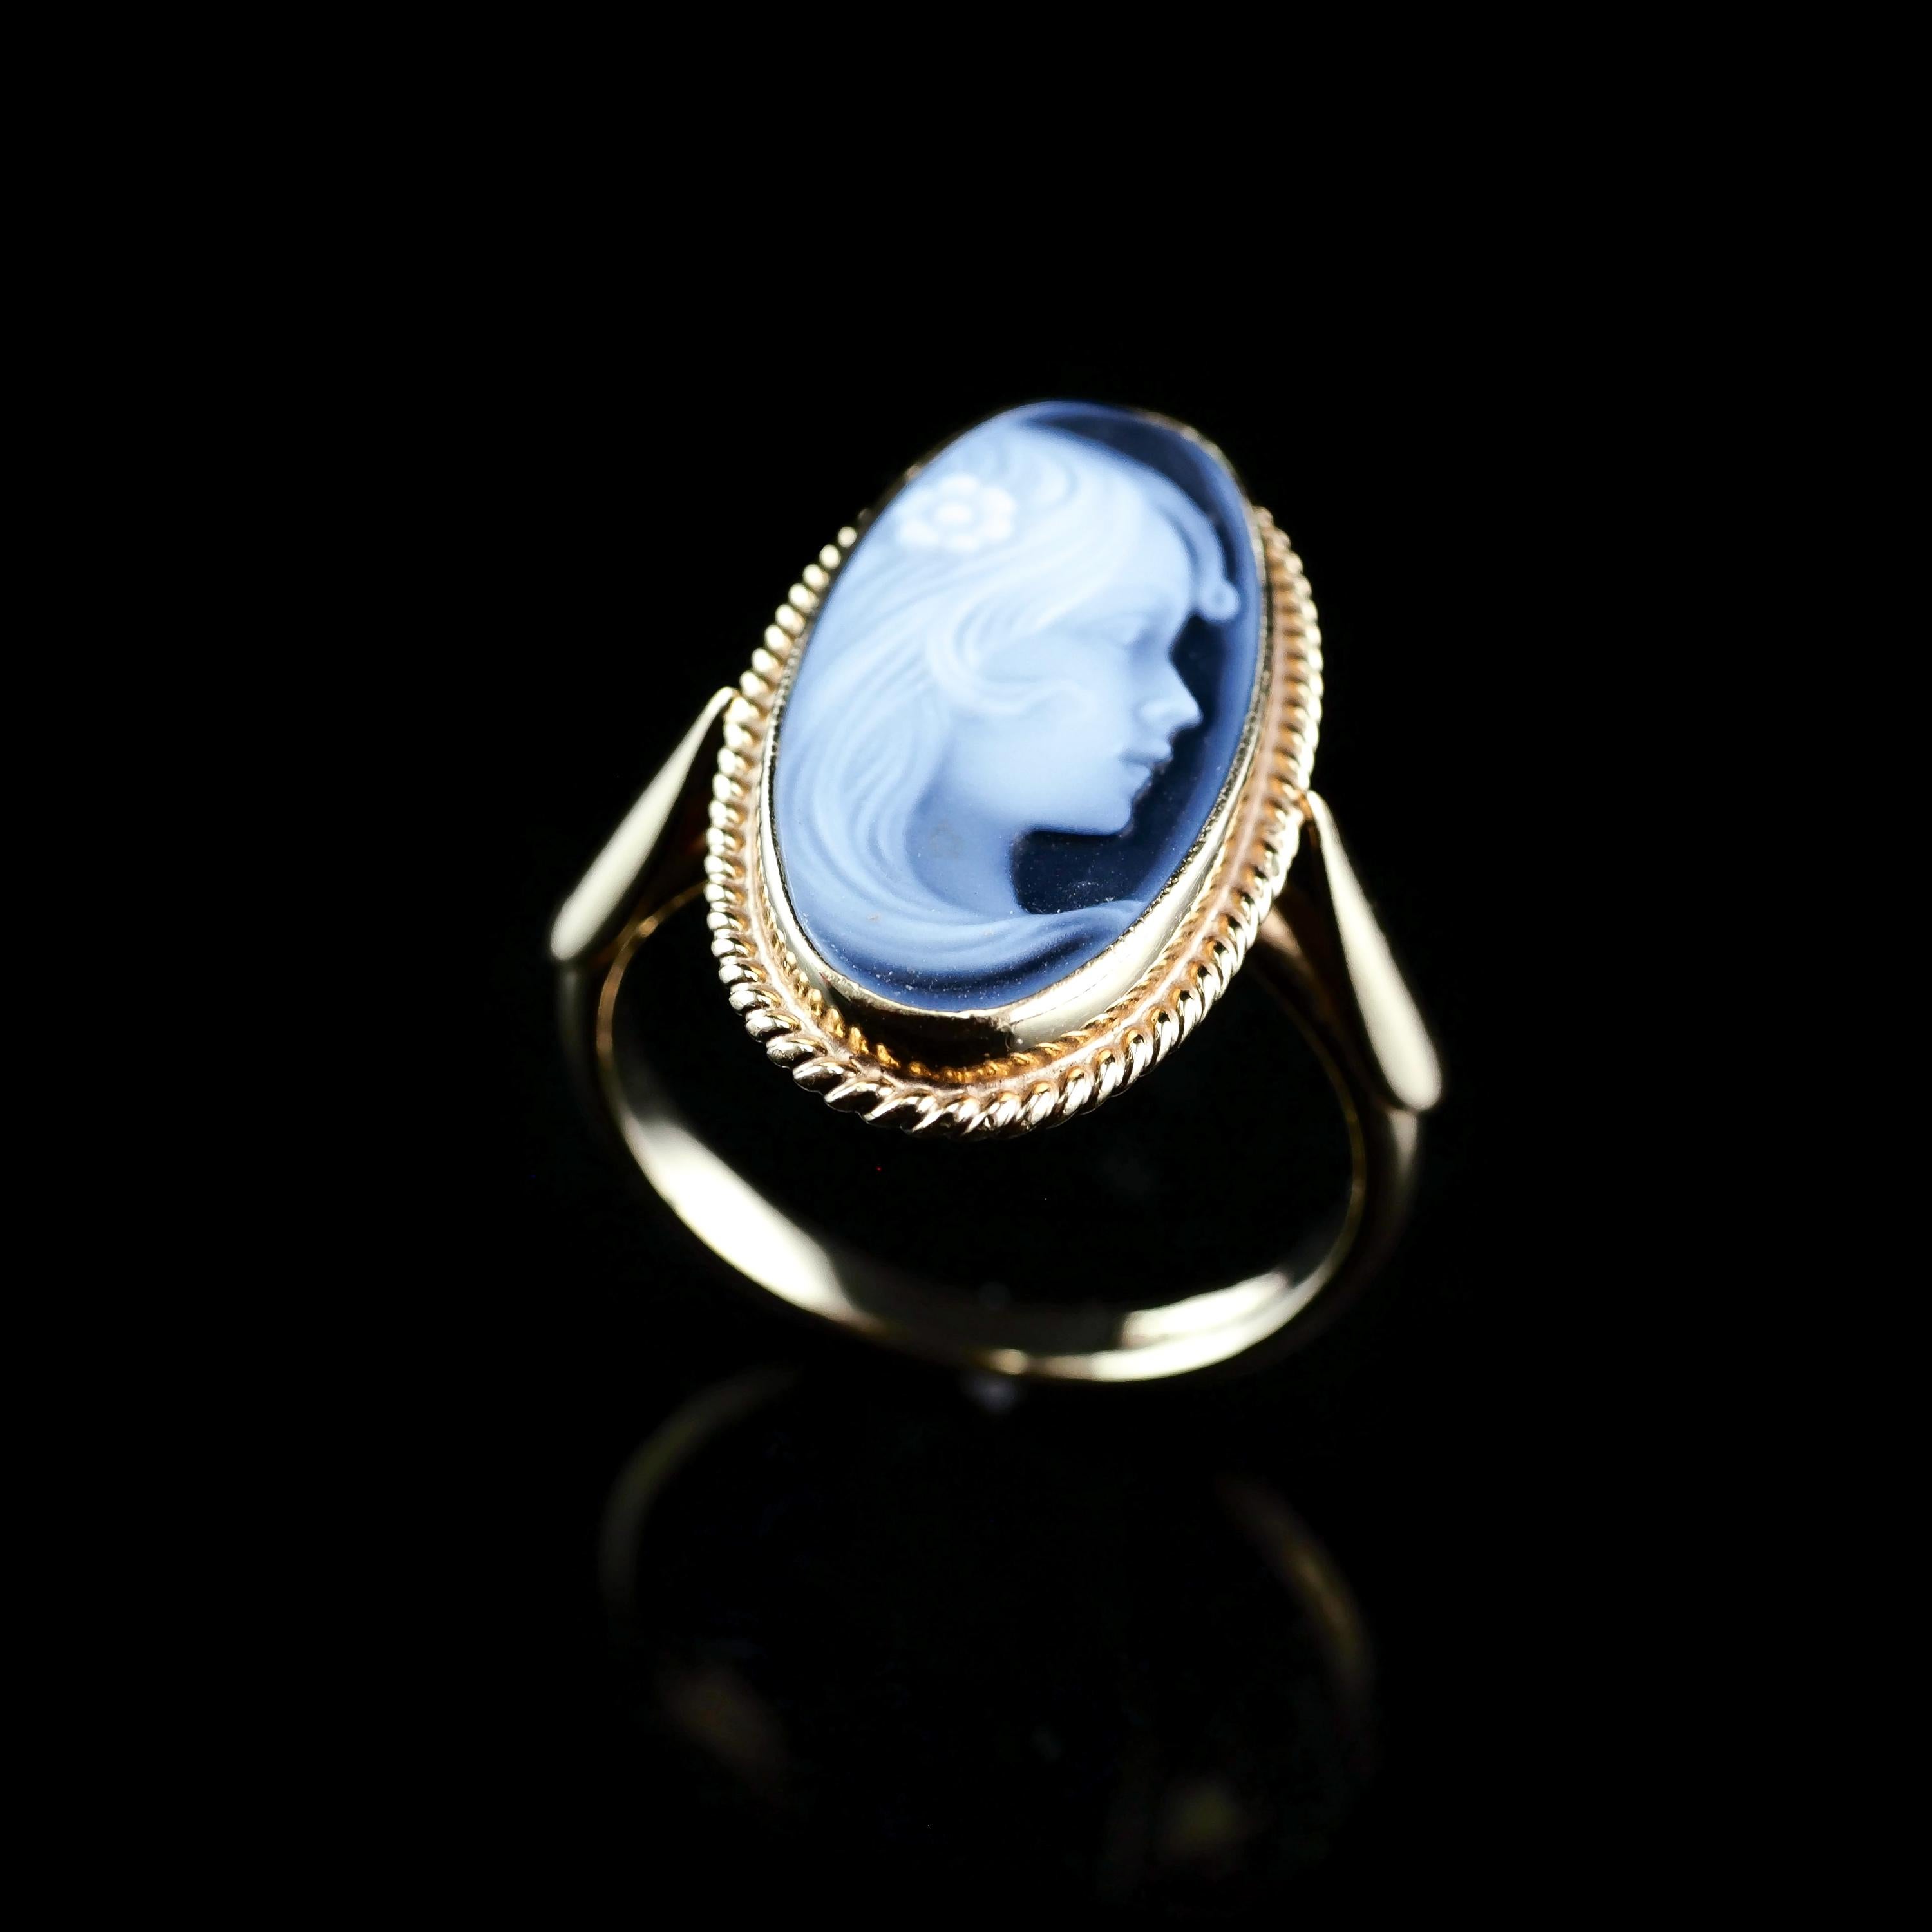 9 Carat Gold Agate Cameo Ring with Beautiful Figural Maiden Head 2